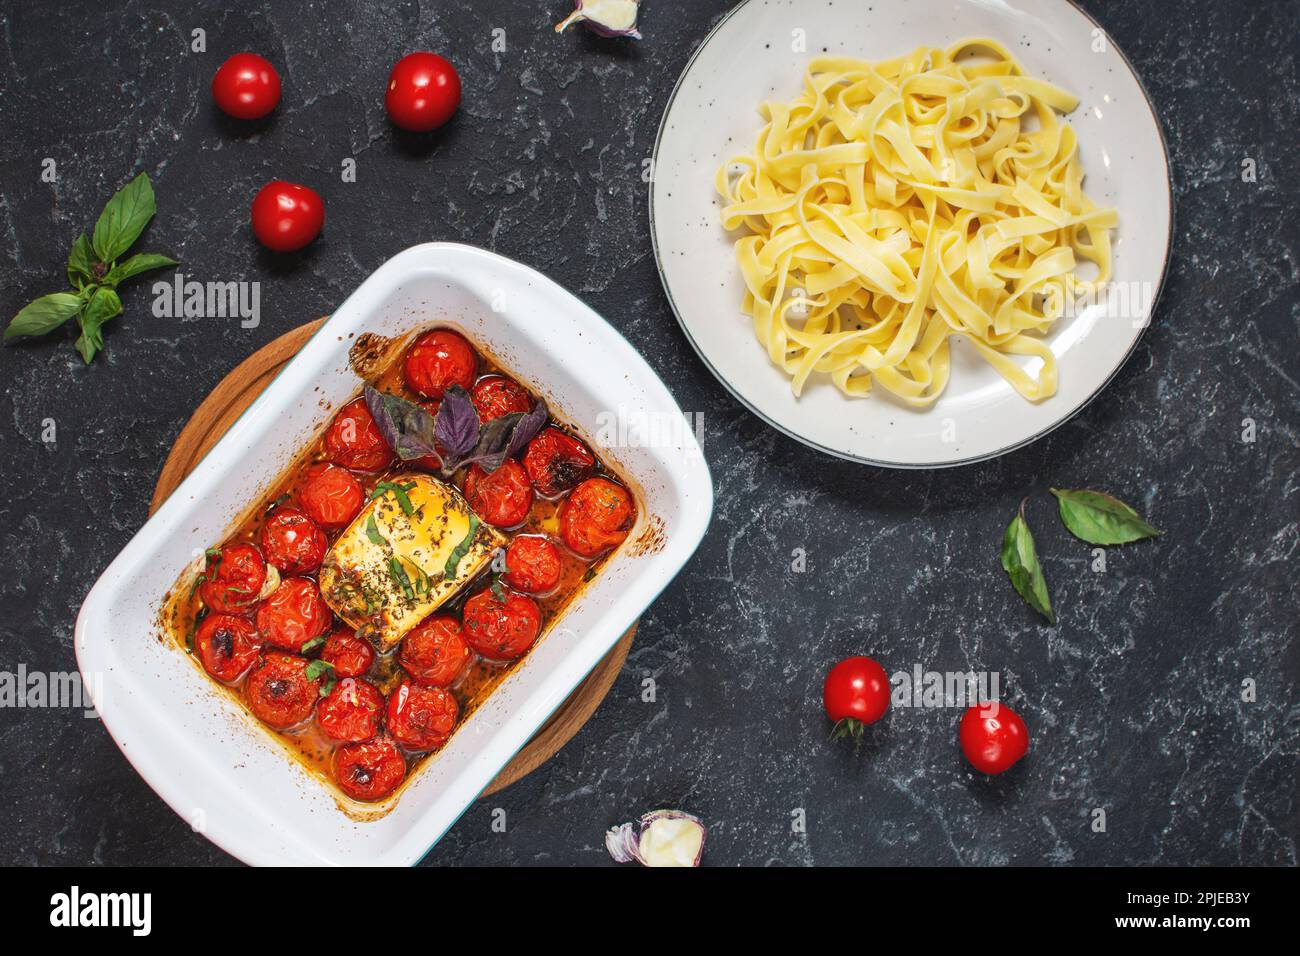 Fetapasta. Trending viral Feta bake pasta recipe made of cherry tomatoes, feta cheese, garlic and herbs in a casserole dish. Top view Stock Photo